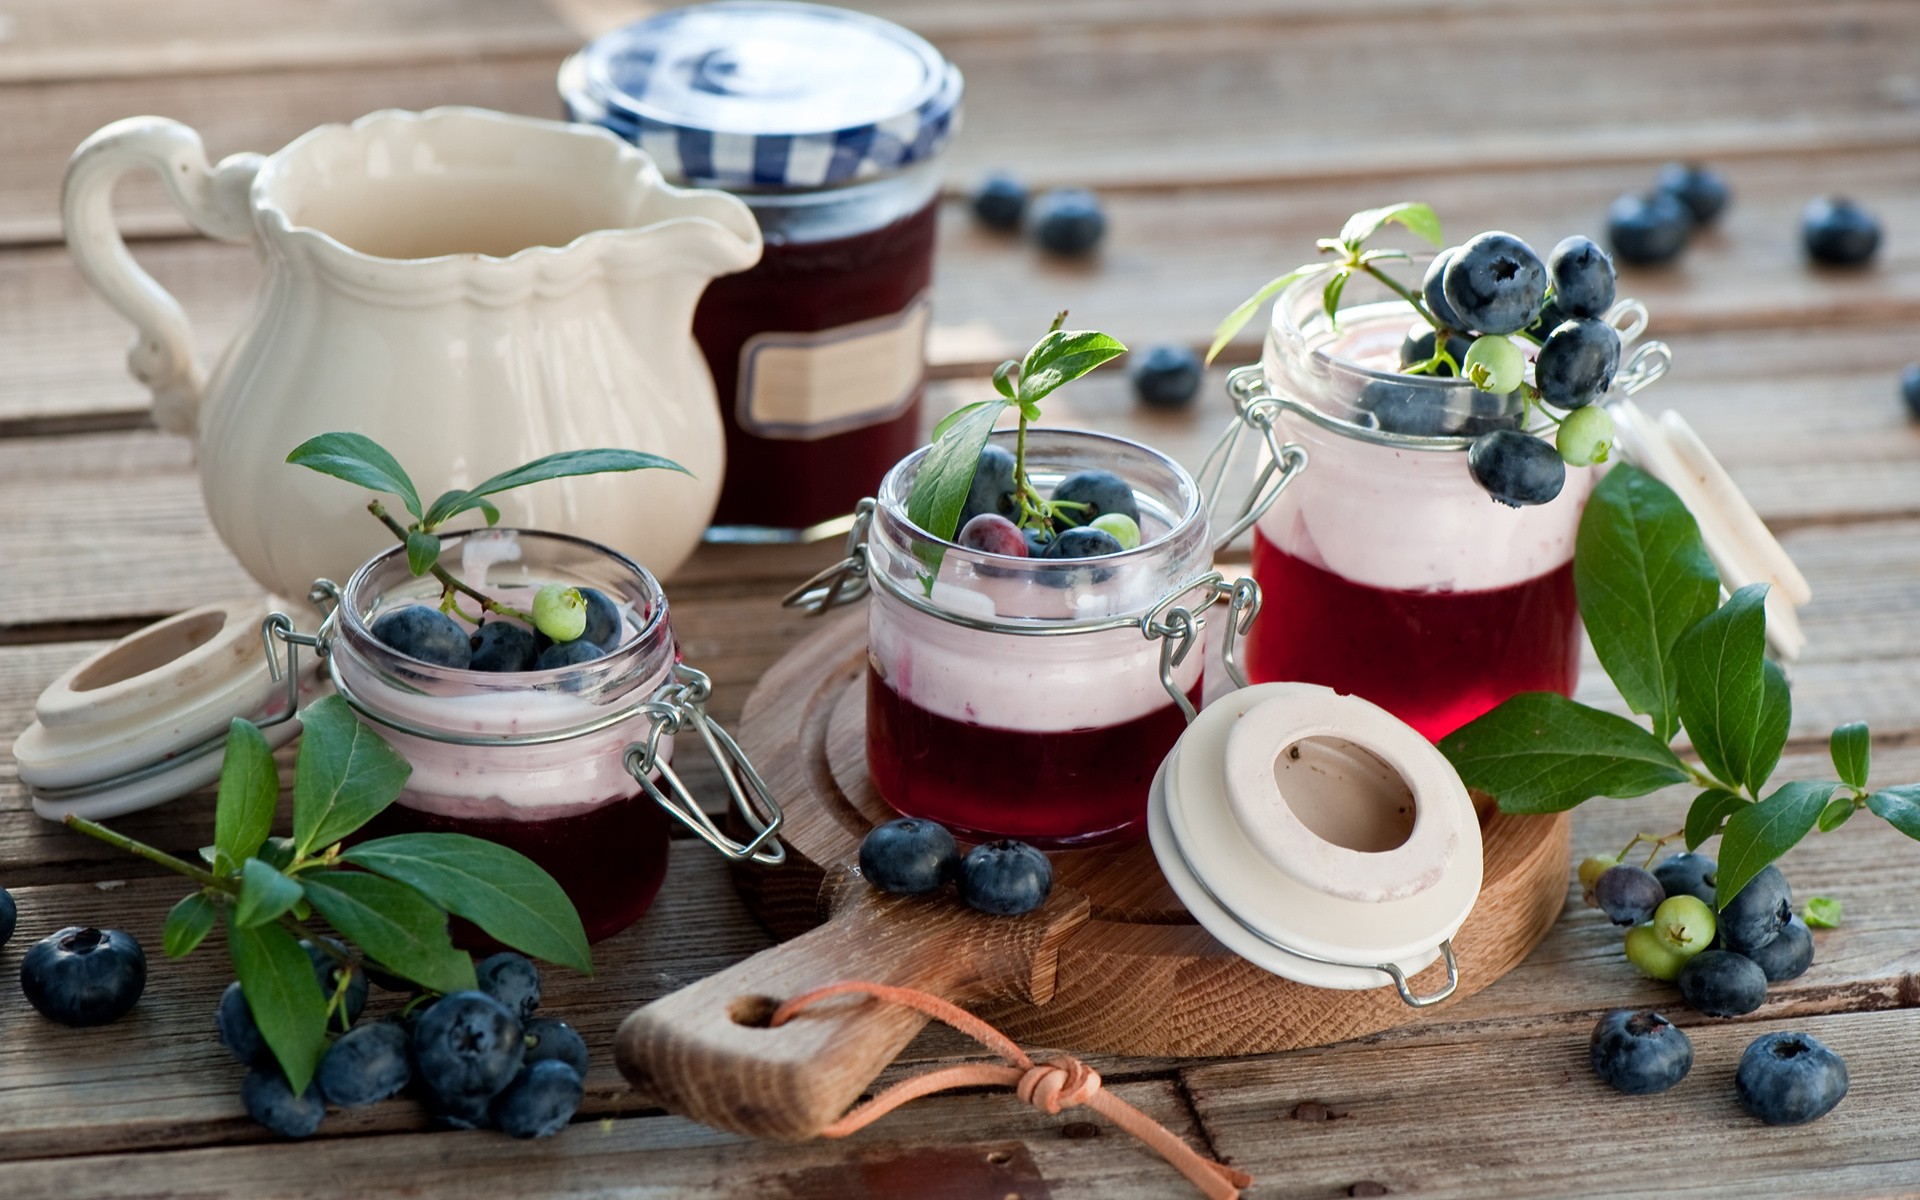 Food Lunch Photography Colorful Wooden Surface Jars Blueberries Fruit Depth Of Field 1920x1200